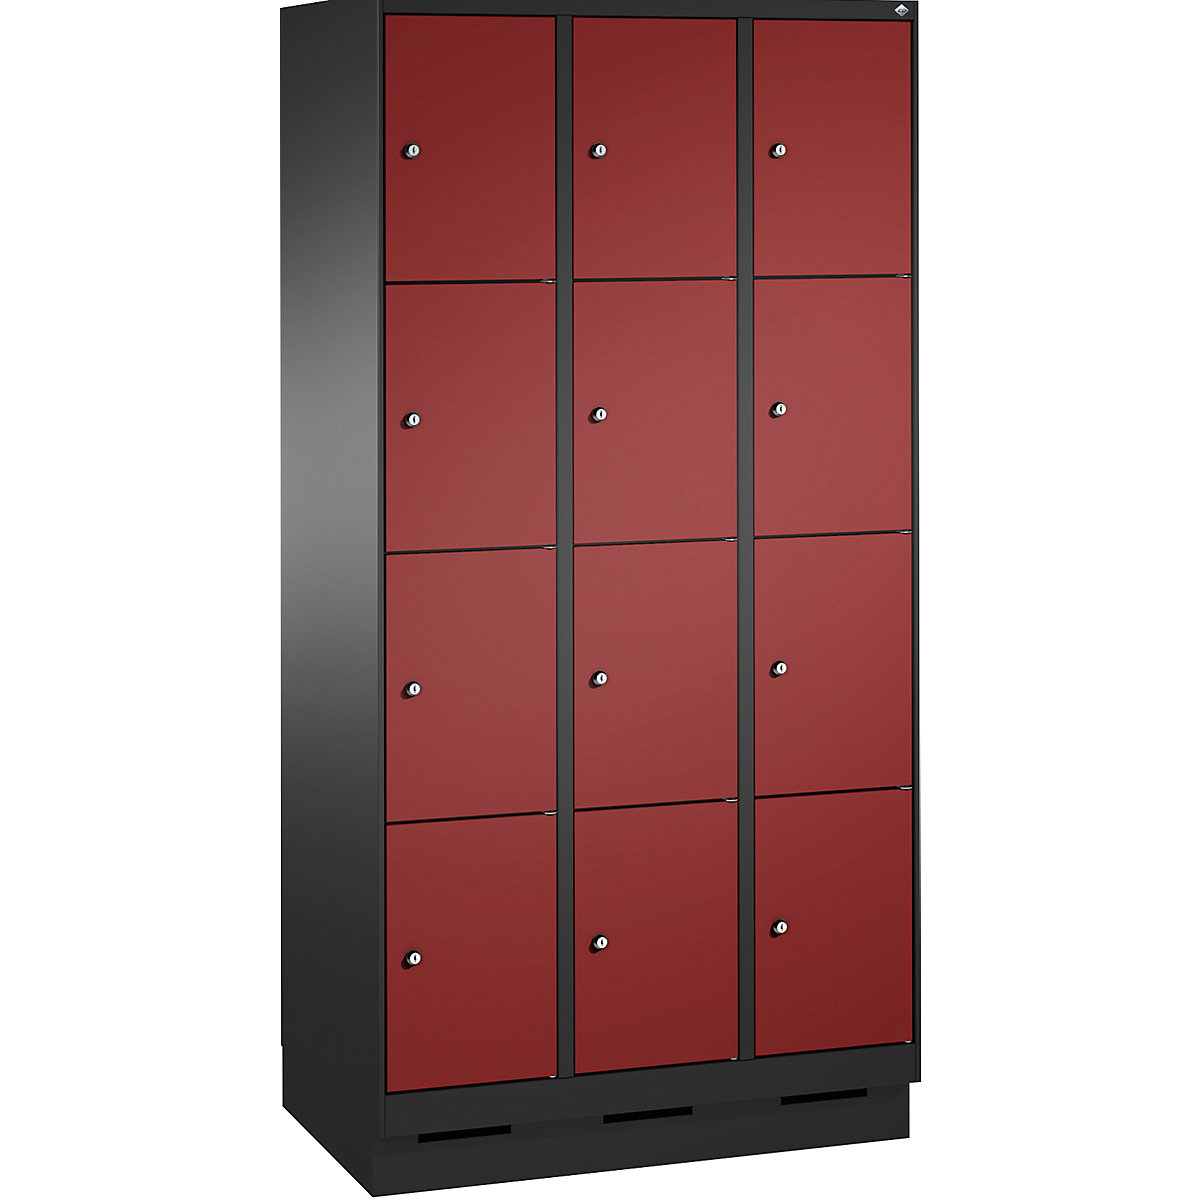 EVOLO locker unit, with plinth – C+P, 3 compartments, 4 shelf compartments each, compartment width 300 mm, black grey / ruby red-5